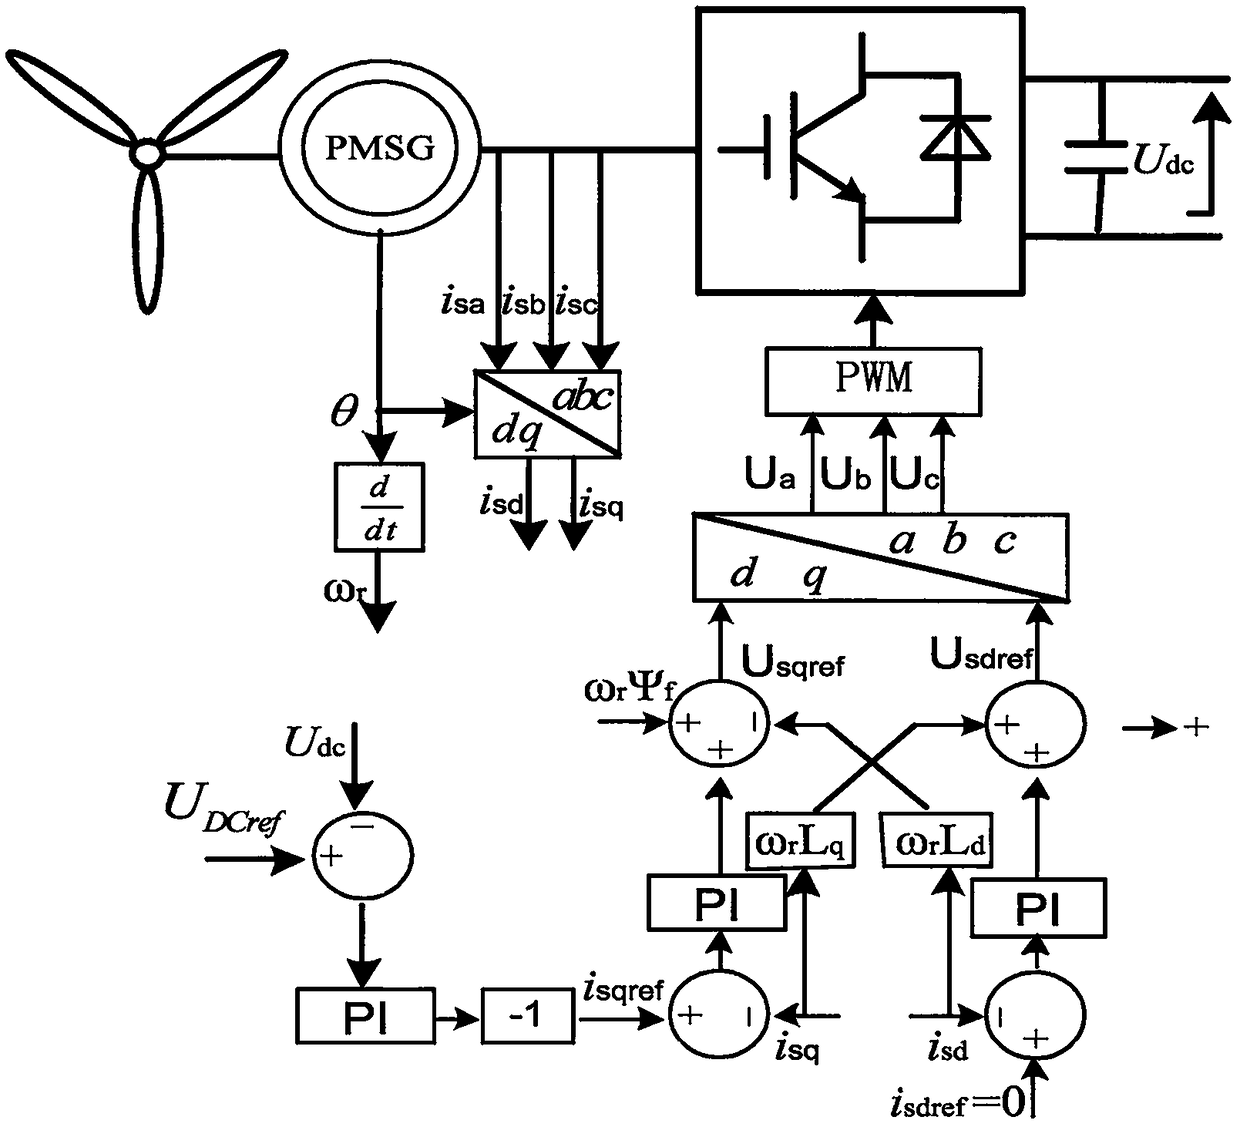 VSG-based grid-connected active support control structure of PMSG